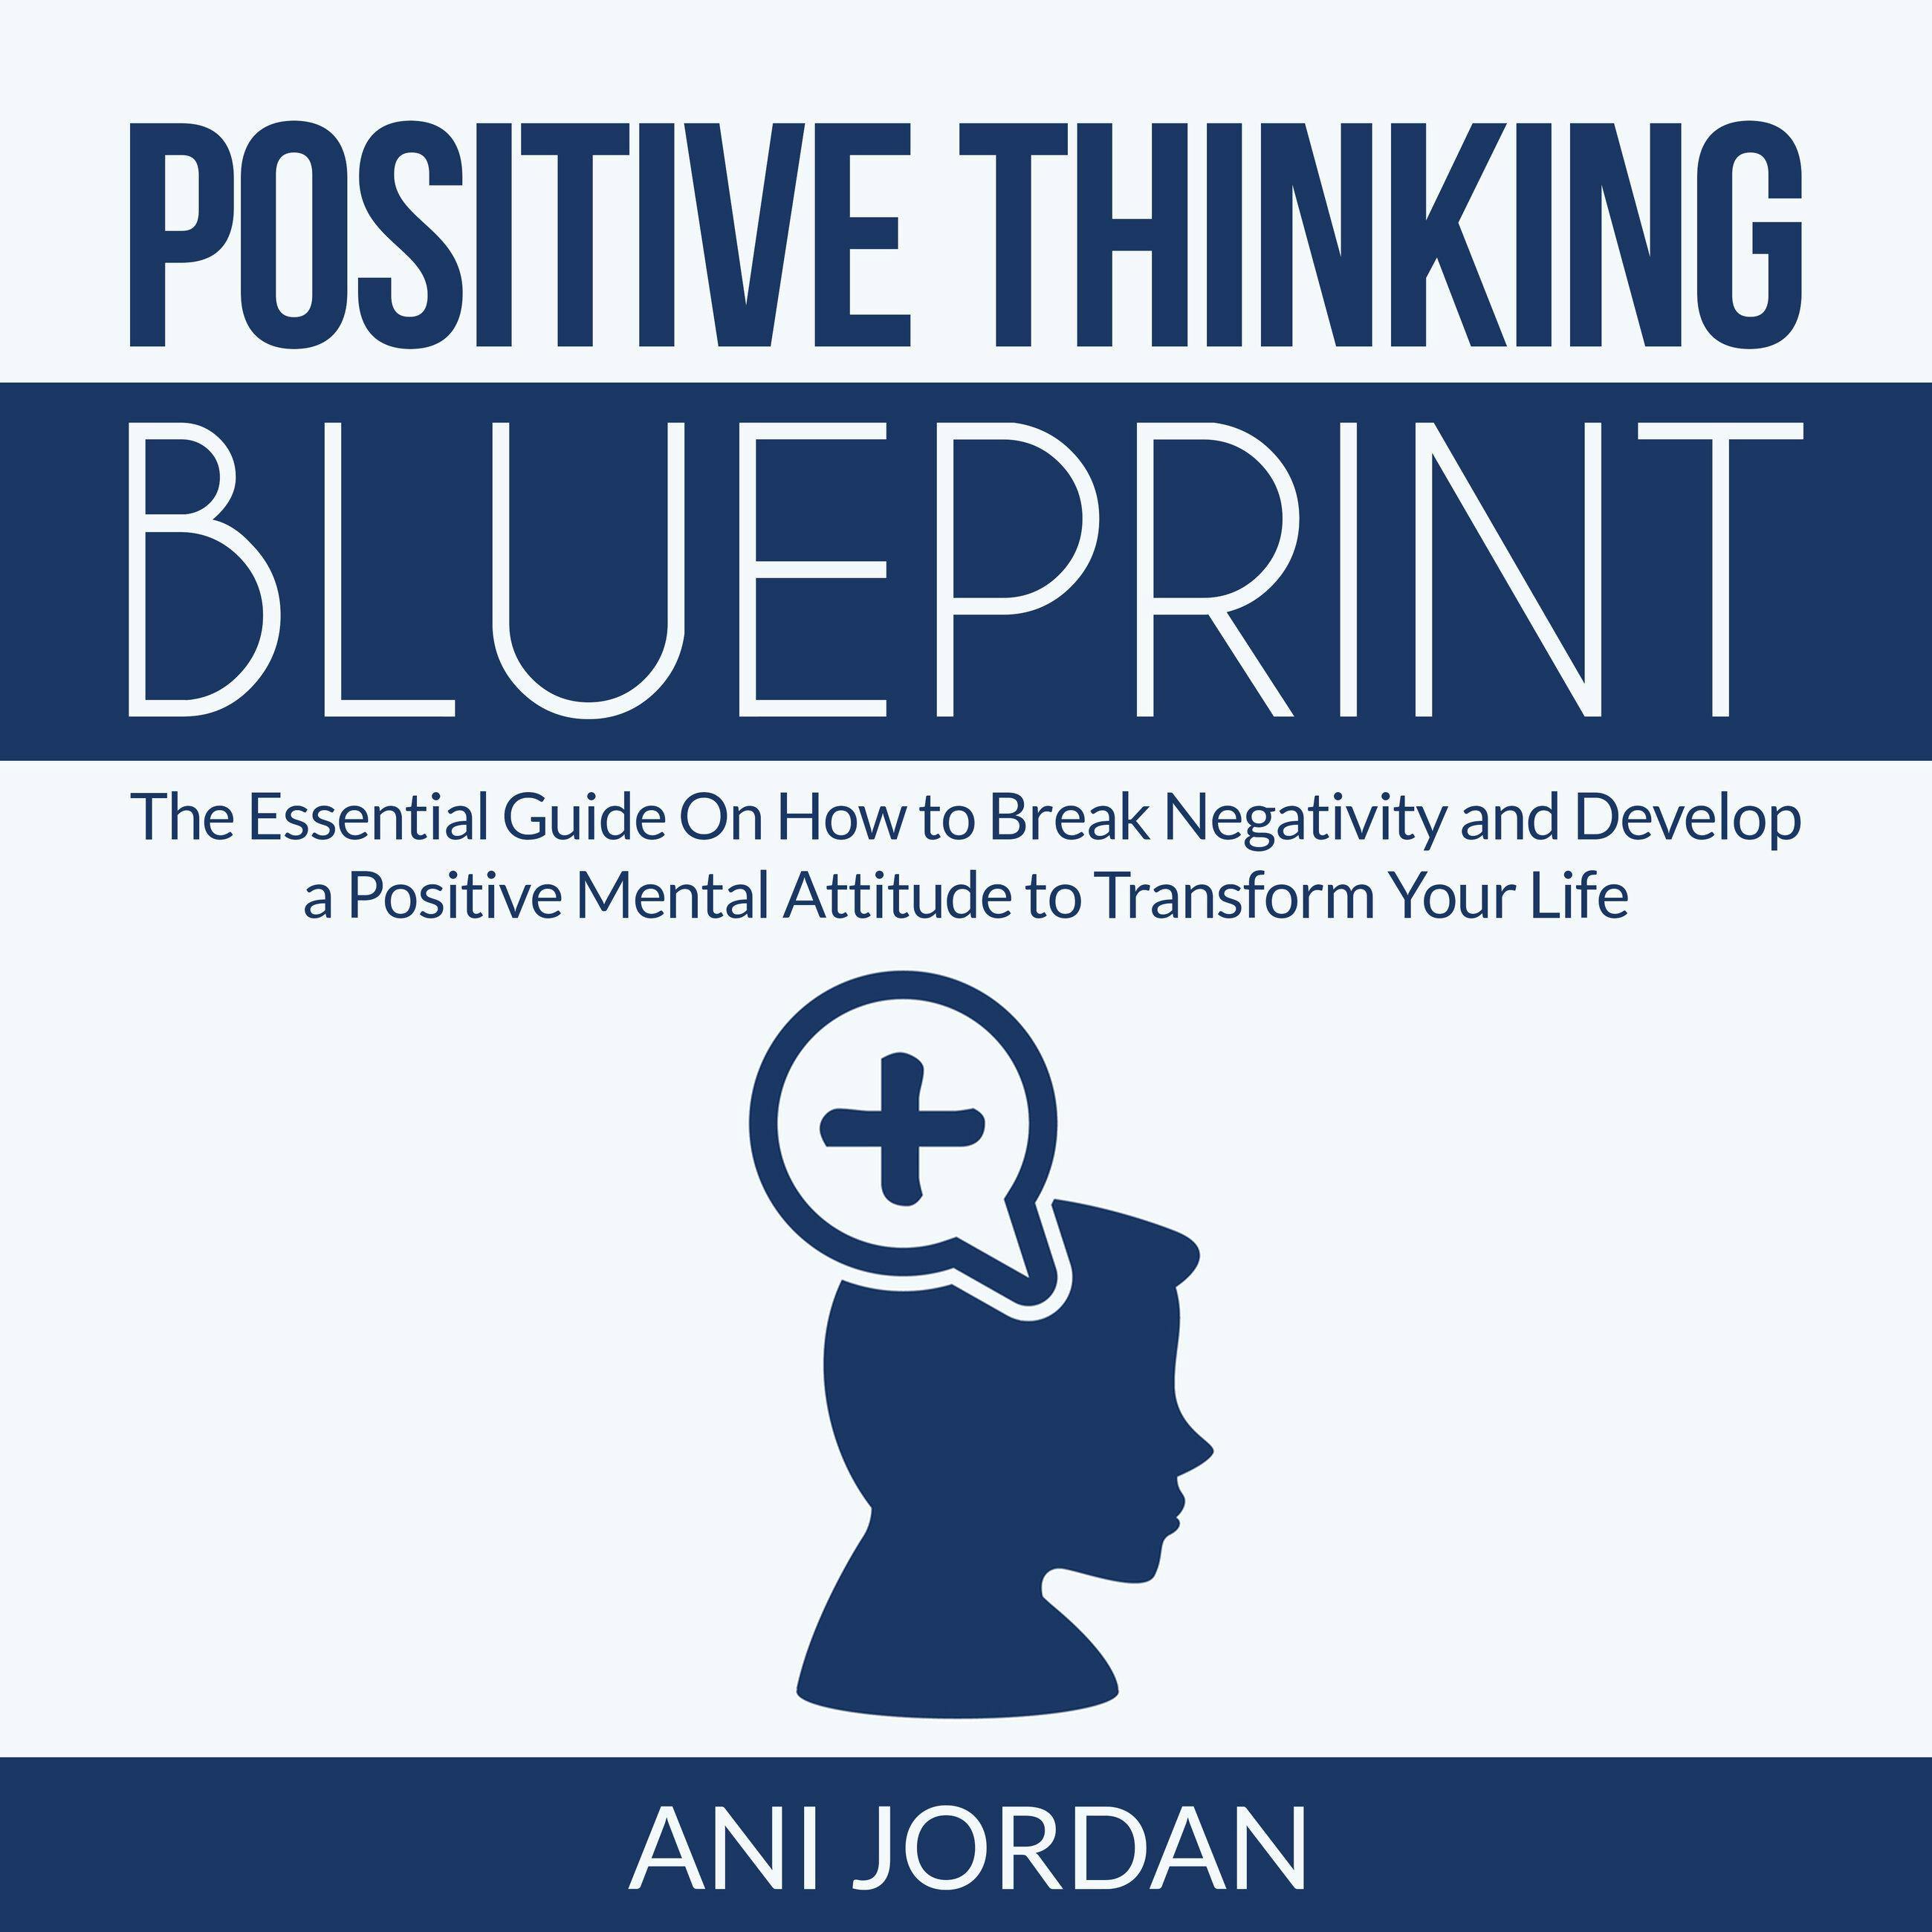 Positive Thinking Blueprint: The Essential Guide On How to Break Negativity and Develop a Positive Mental Attitude to Transform Your Life - Ani Jordan